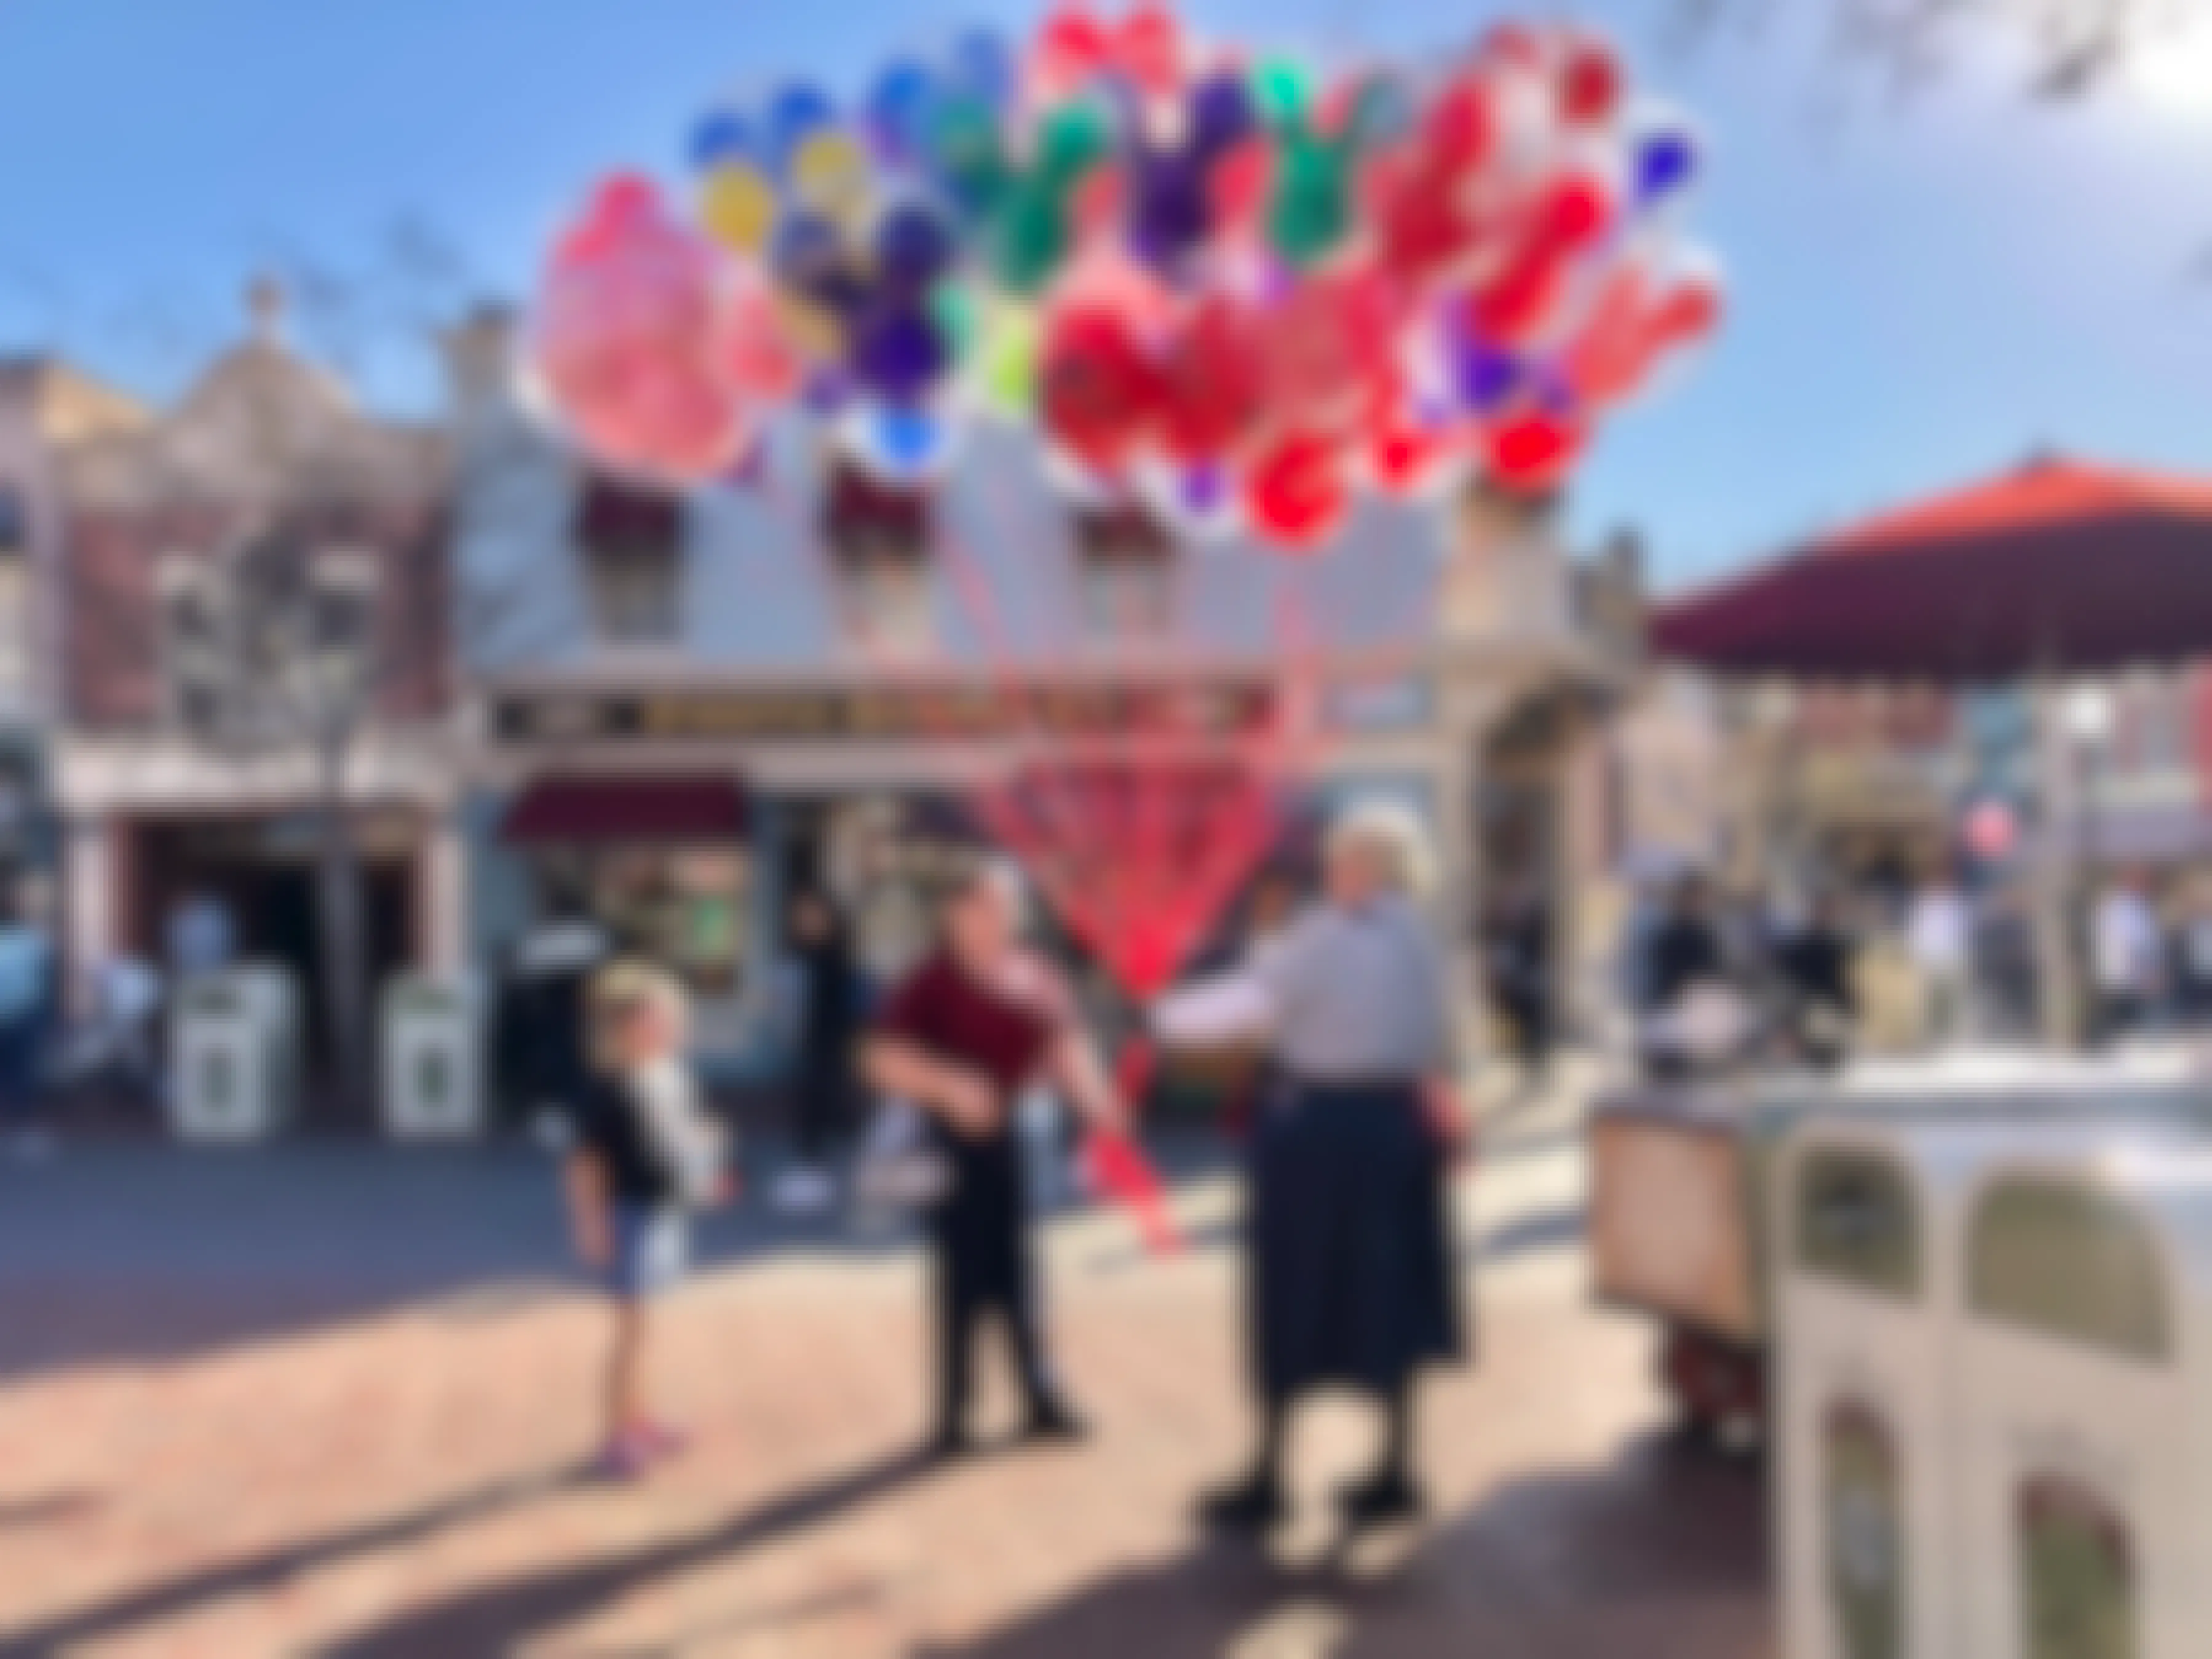 A little girl purchases balloons at Disneyland.